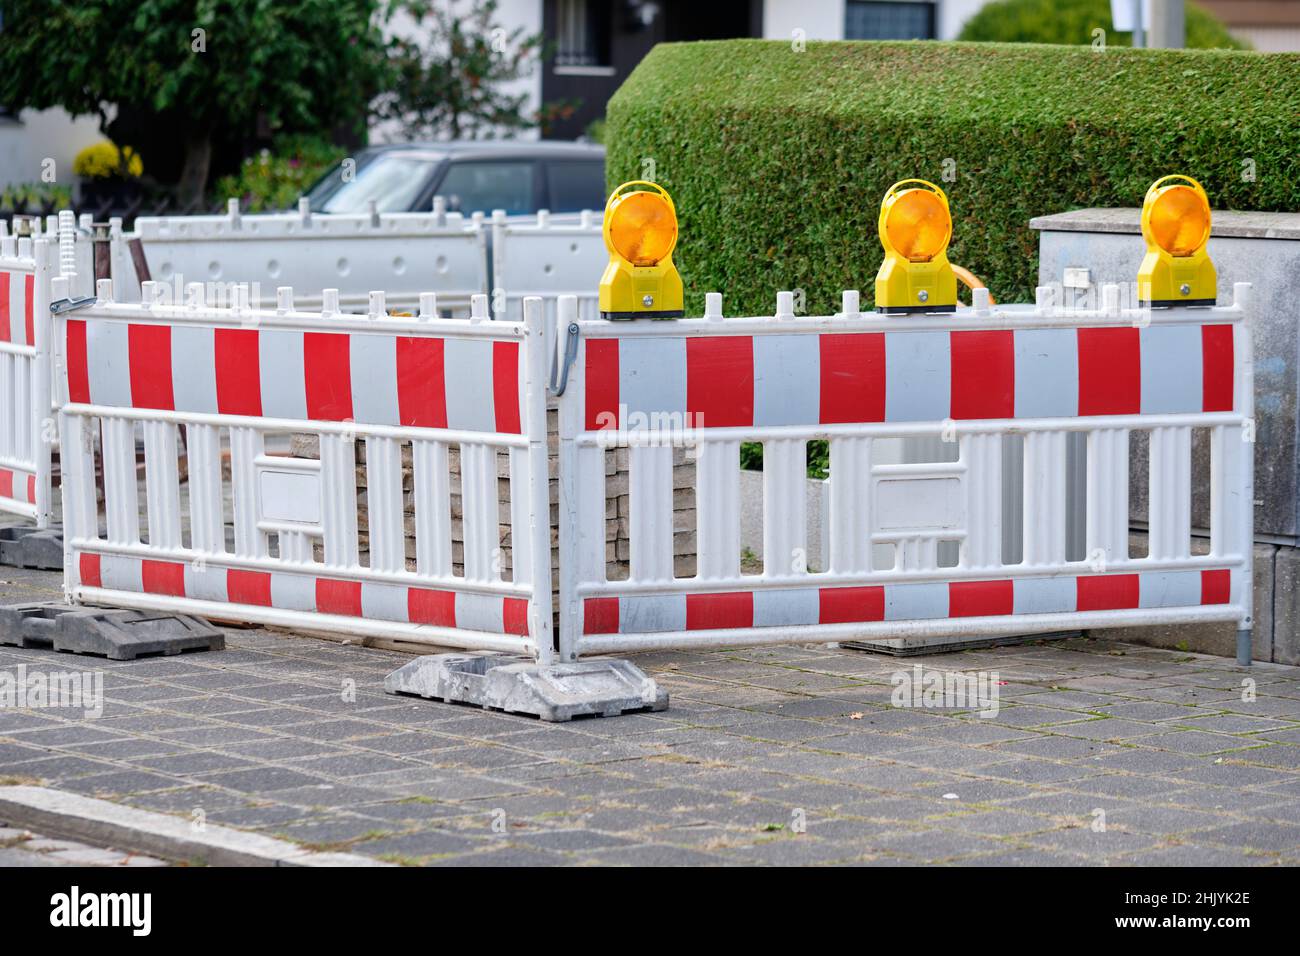 Street barriers with yellow warning lights standing in front of a construction site on the pavement in front of a green hedge. Seen in Germany in Octo Stock Photo